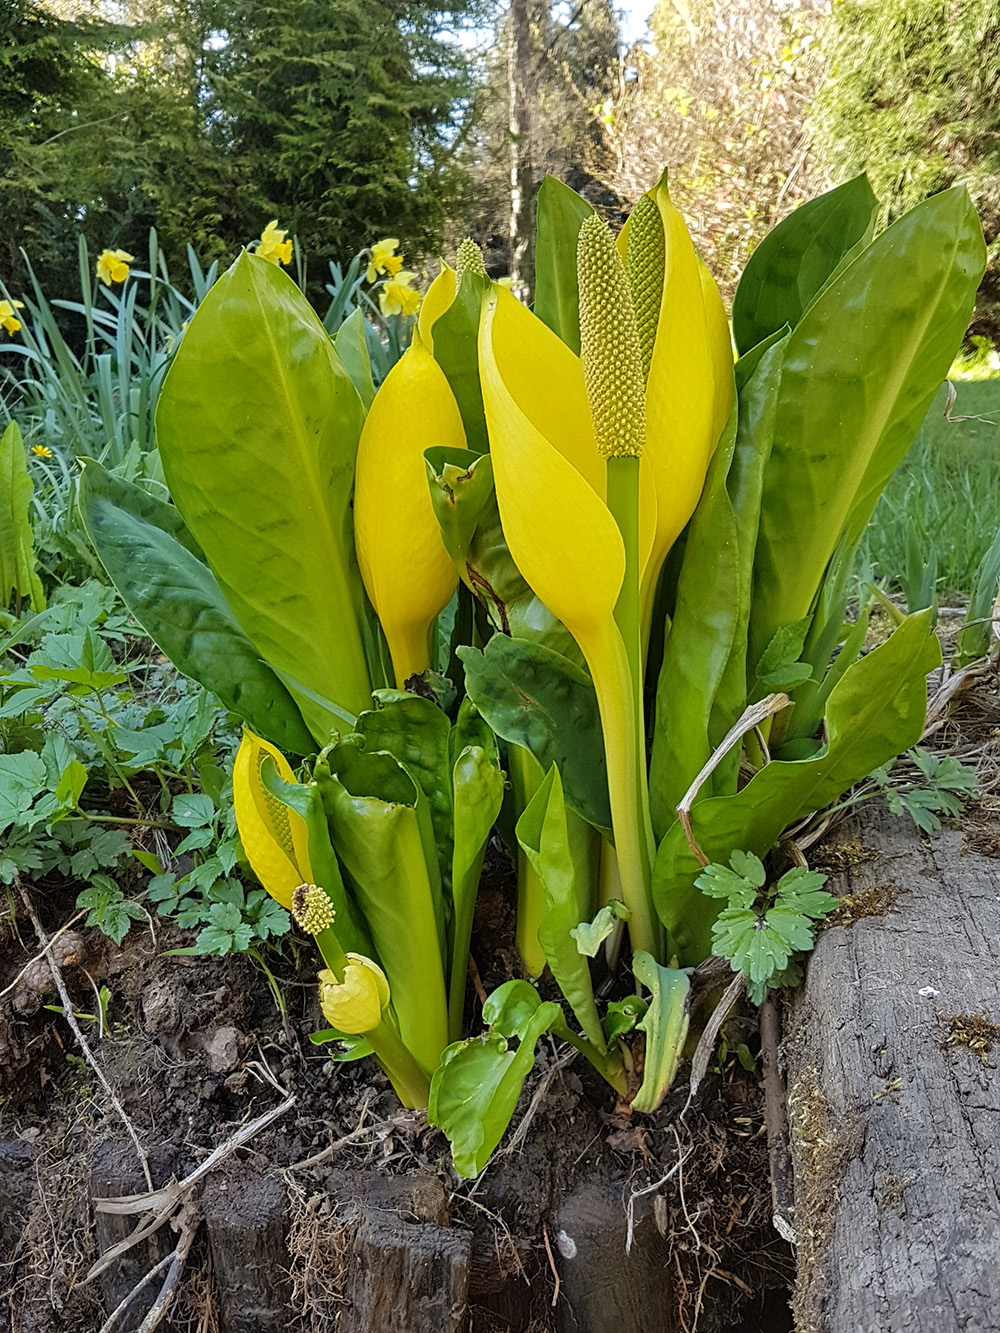 An unusual and unidentified plant in the garden.